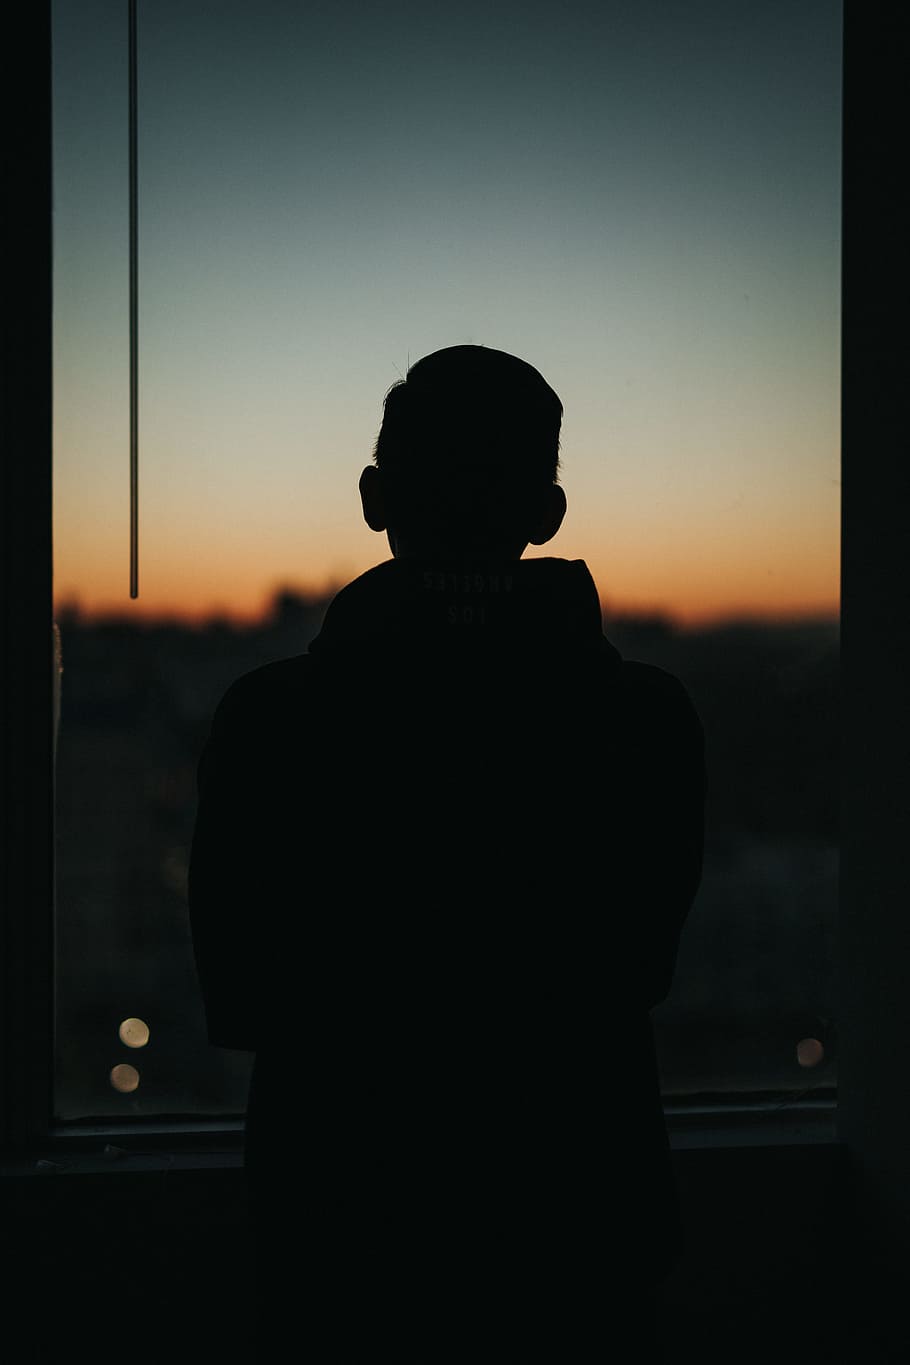 HD wallpaper: man standing front of glass window, shadow, silhouette, outline